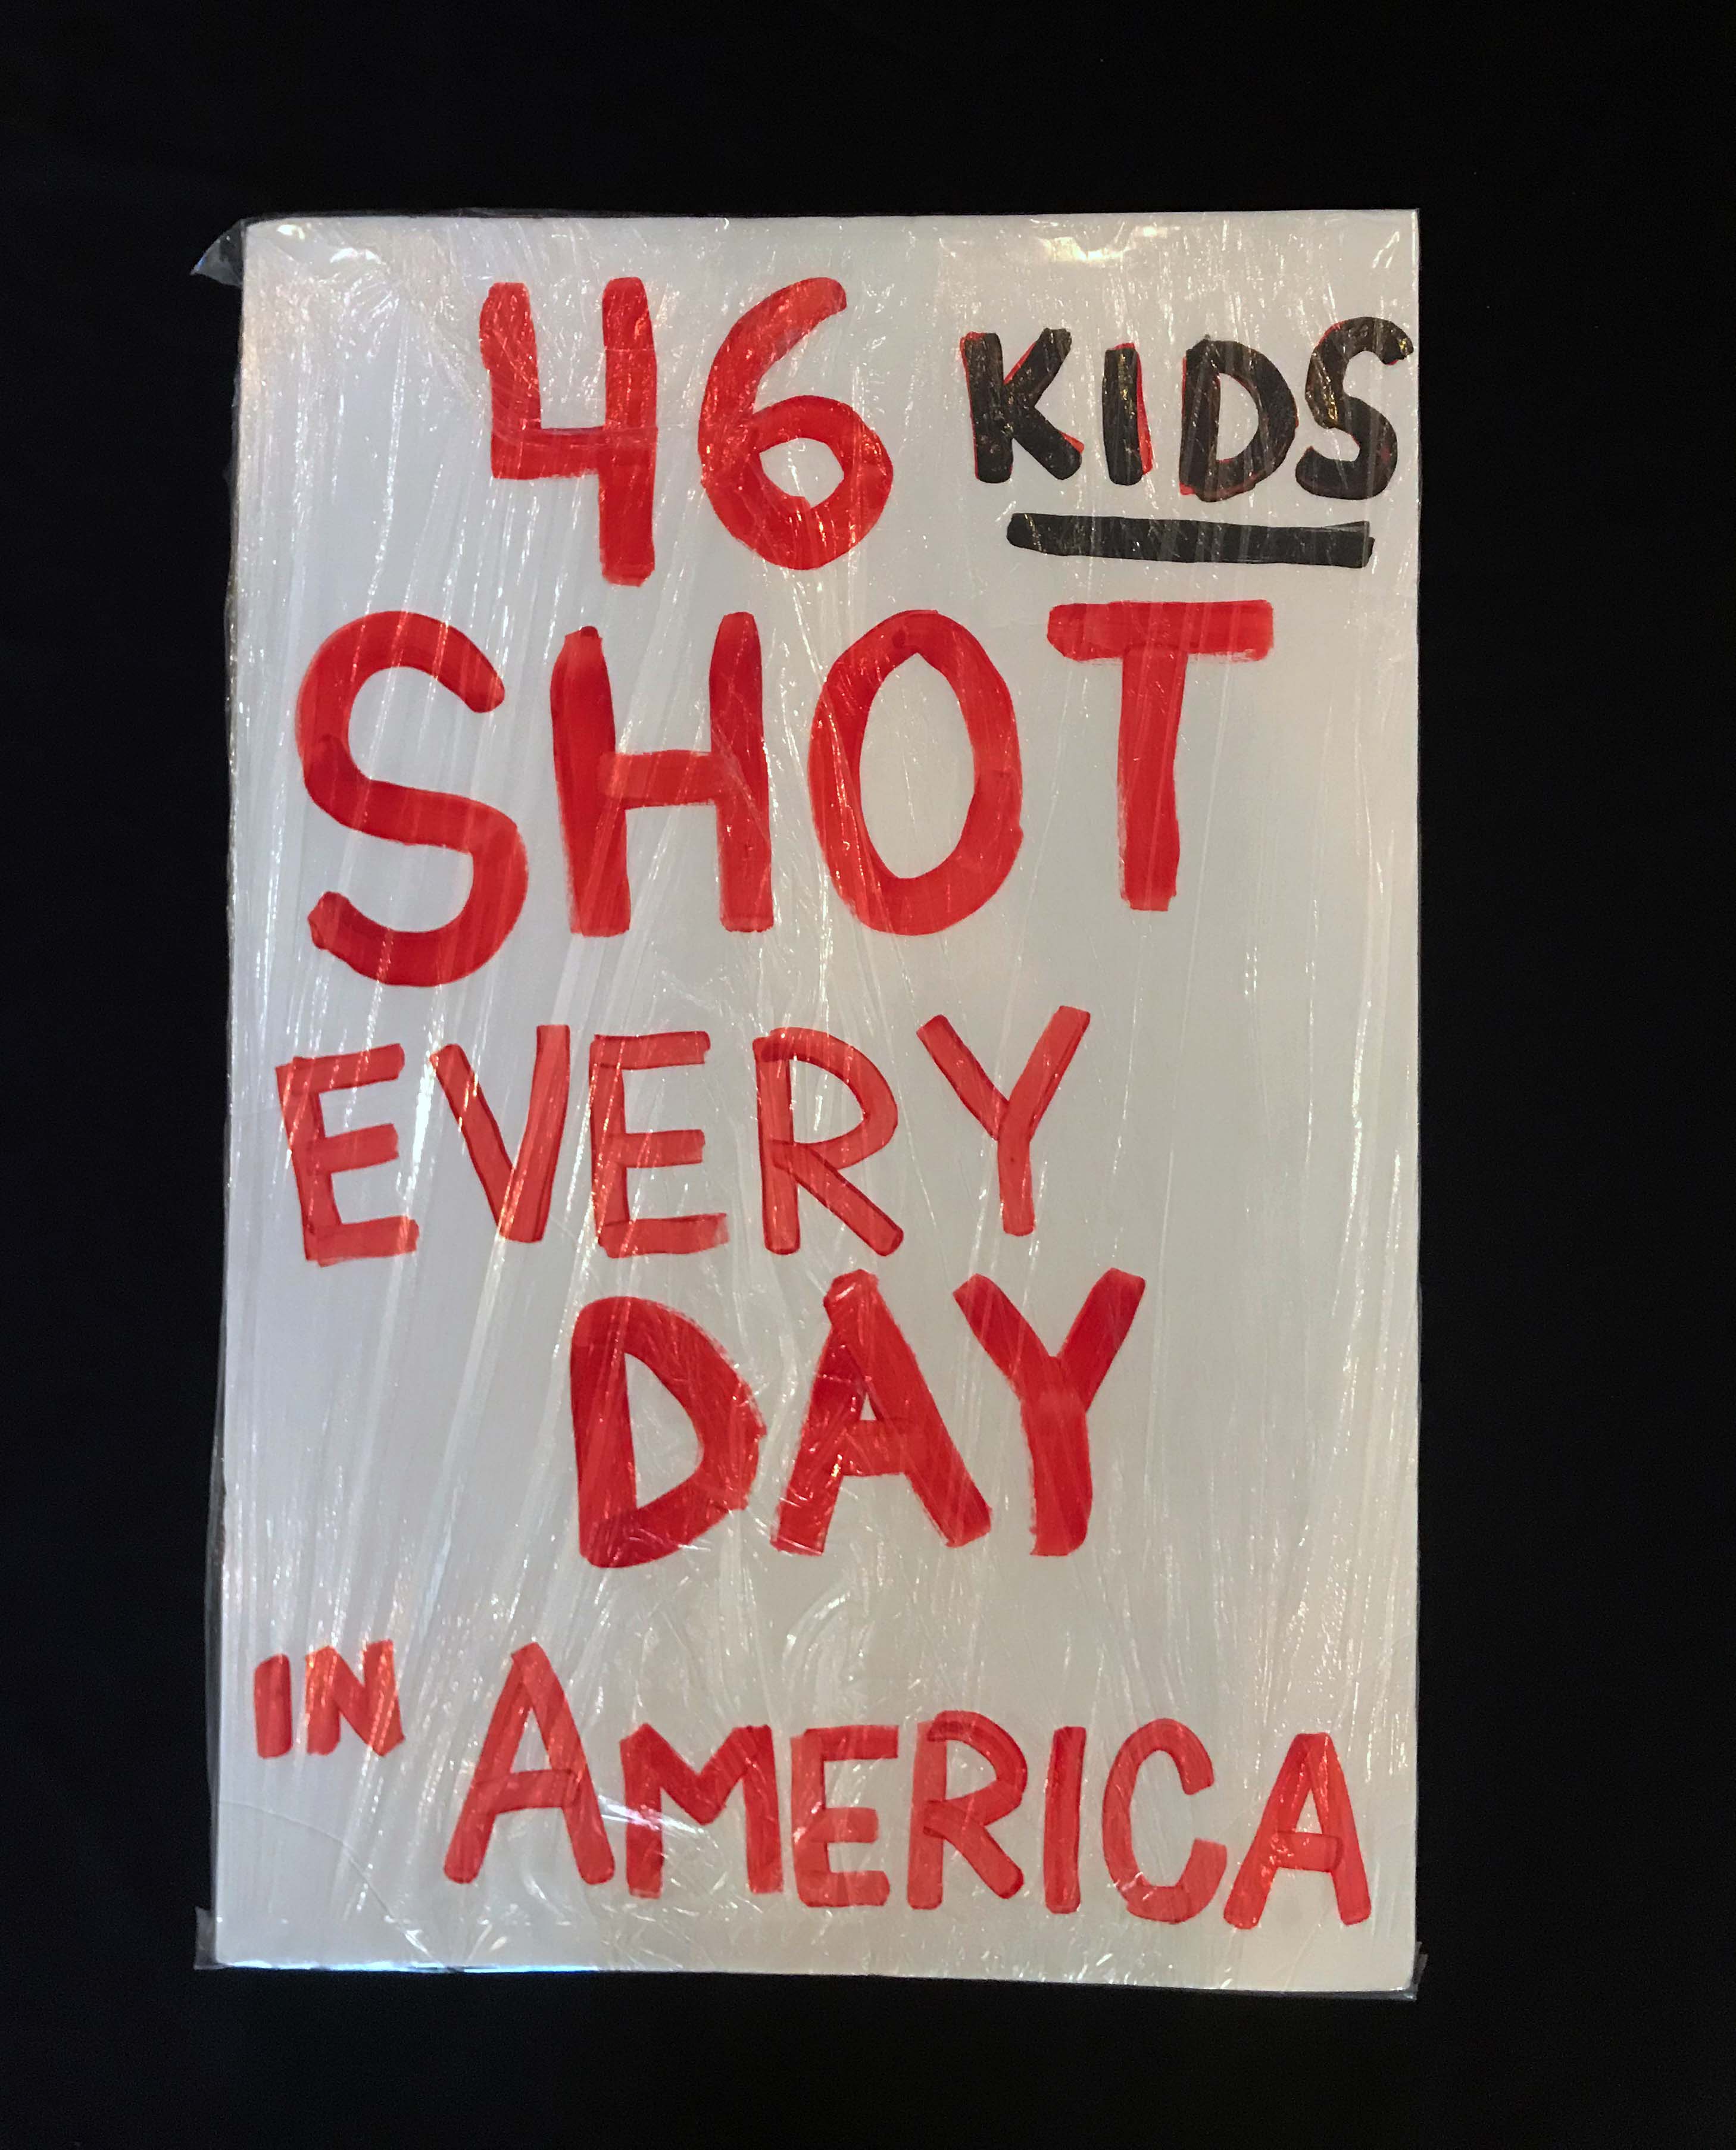 Charlotte March for Our Lives, 2018. Sign reads: "46 kids shot every day in America"